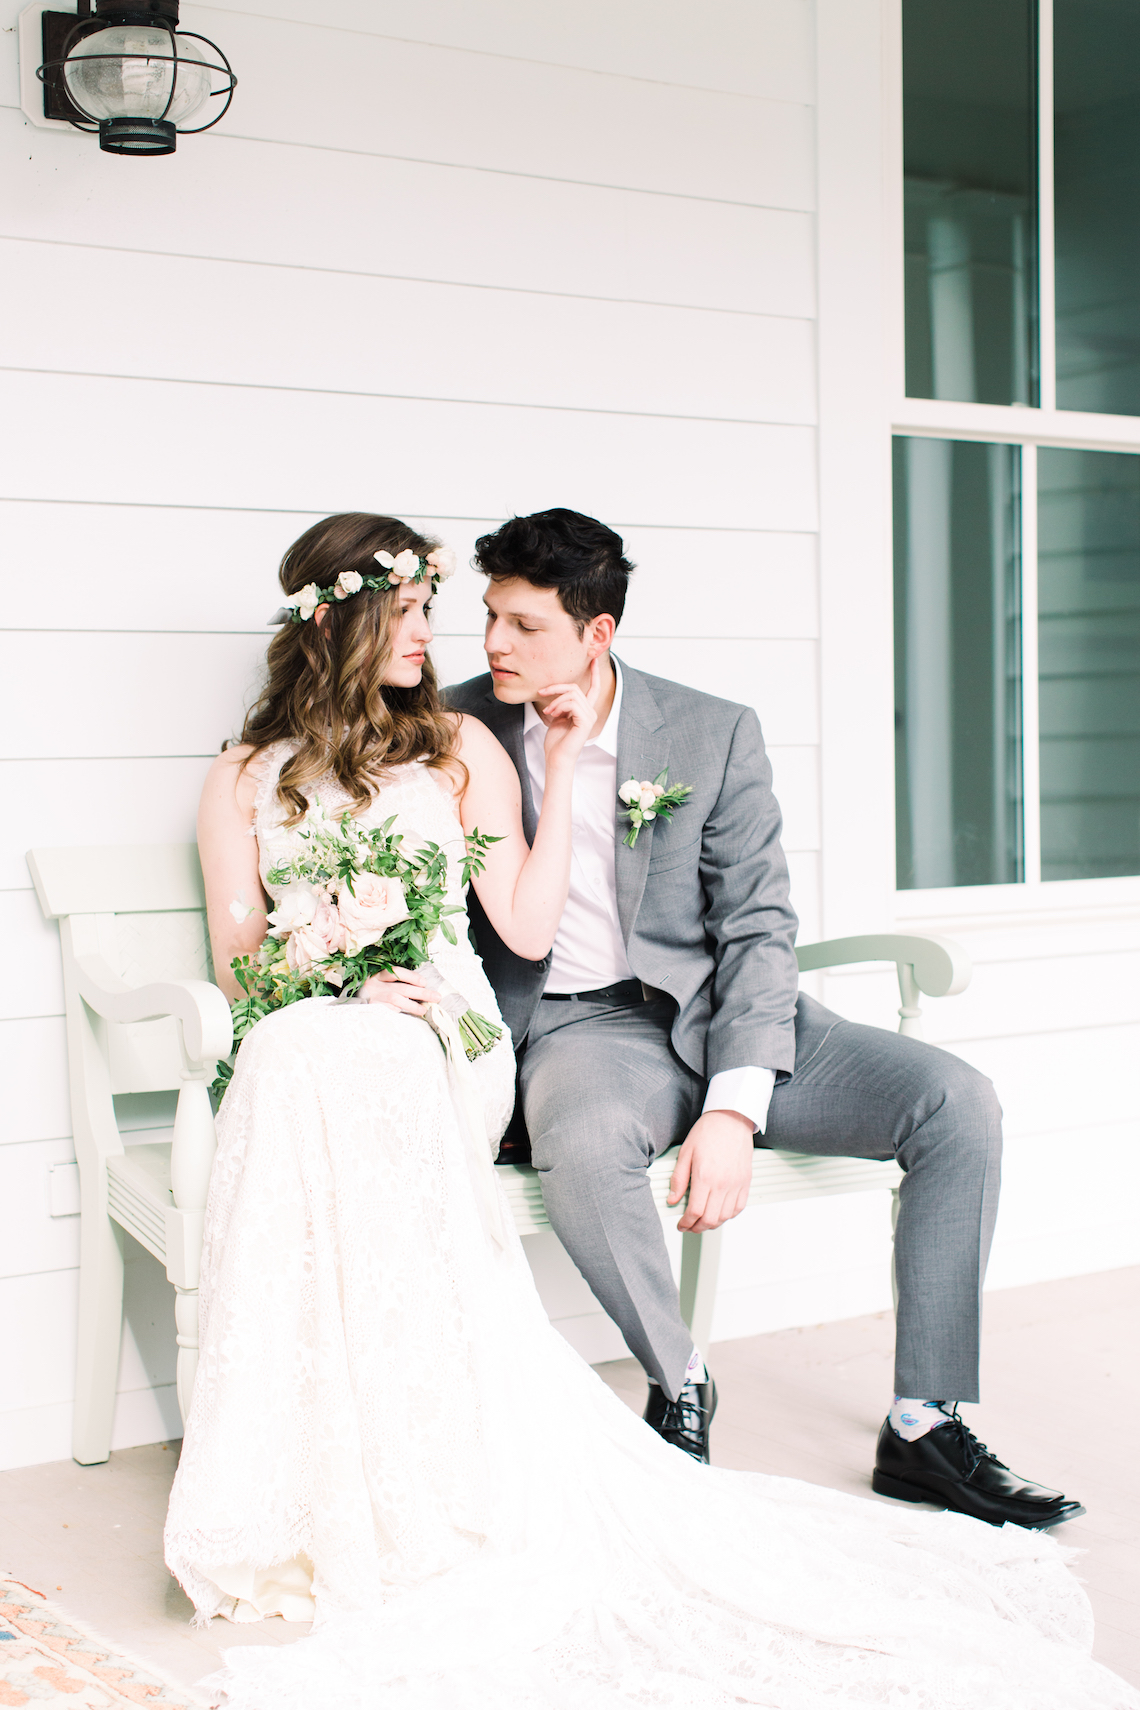 Quaint Country Chic Boho Wedding Inspiration – Sons and Daughters Photography 22